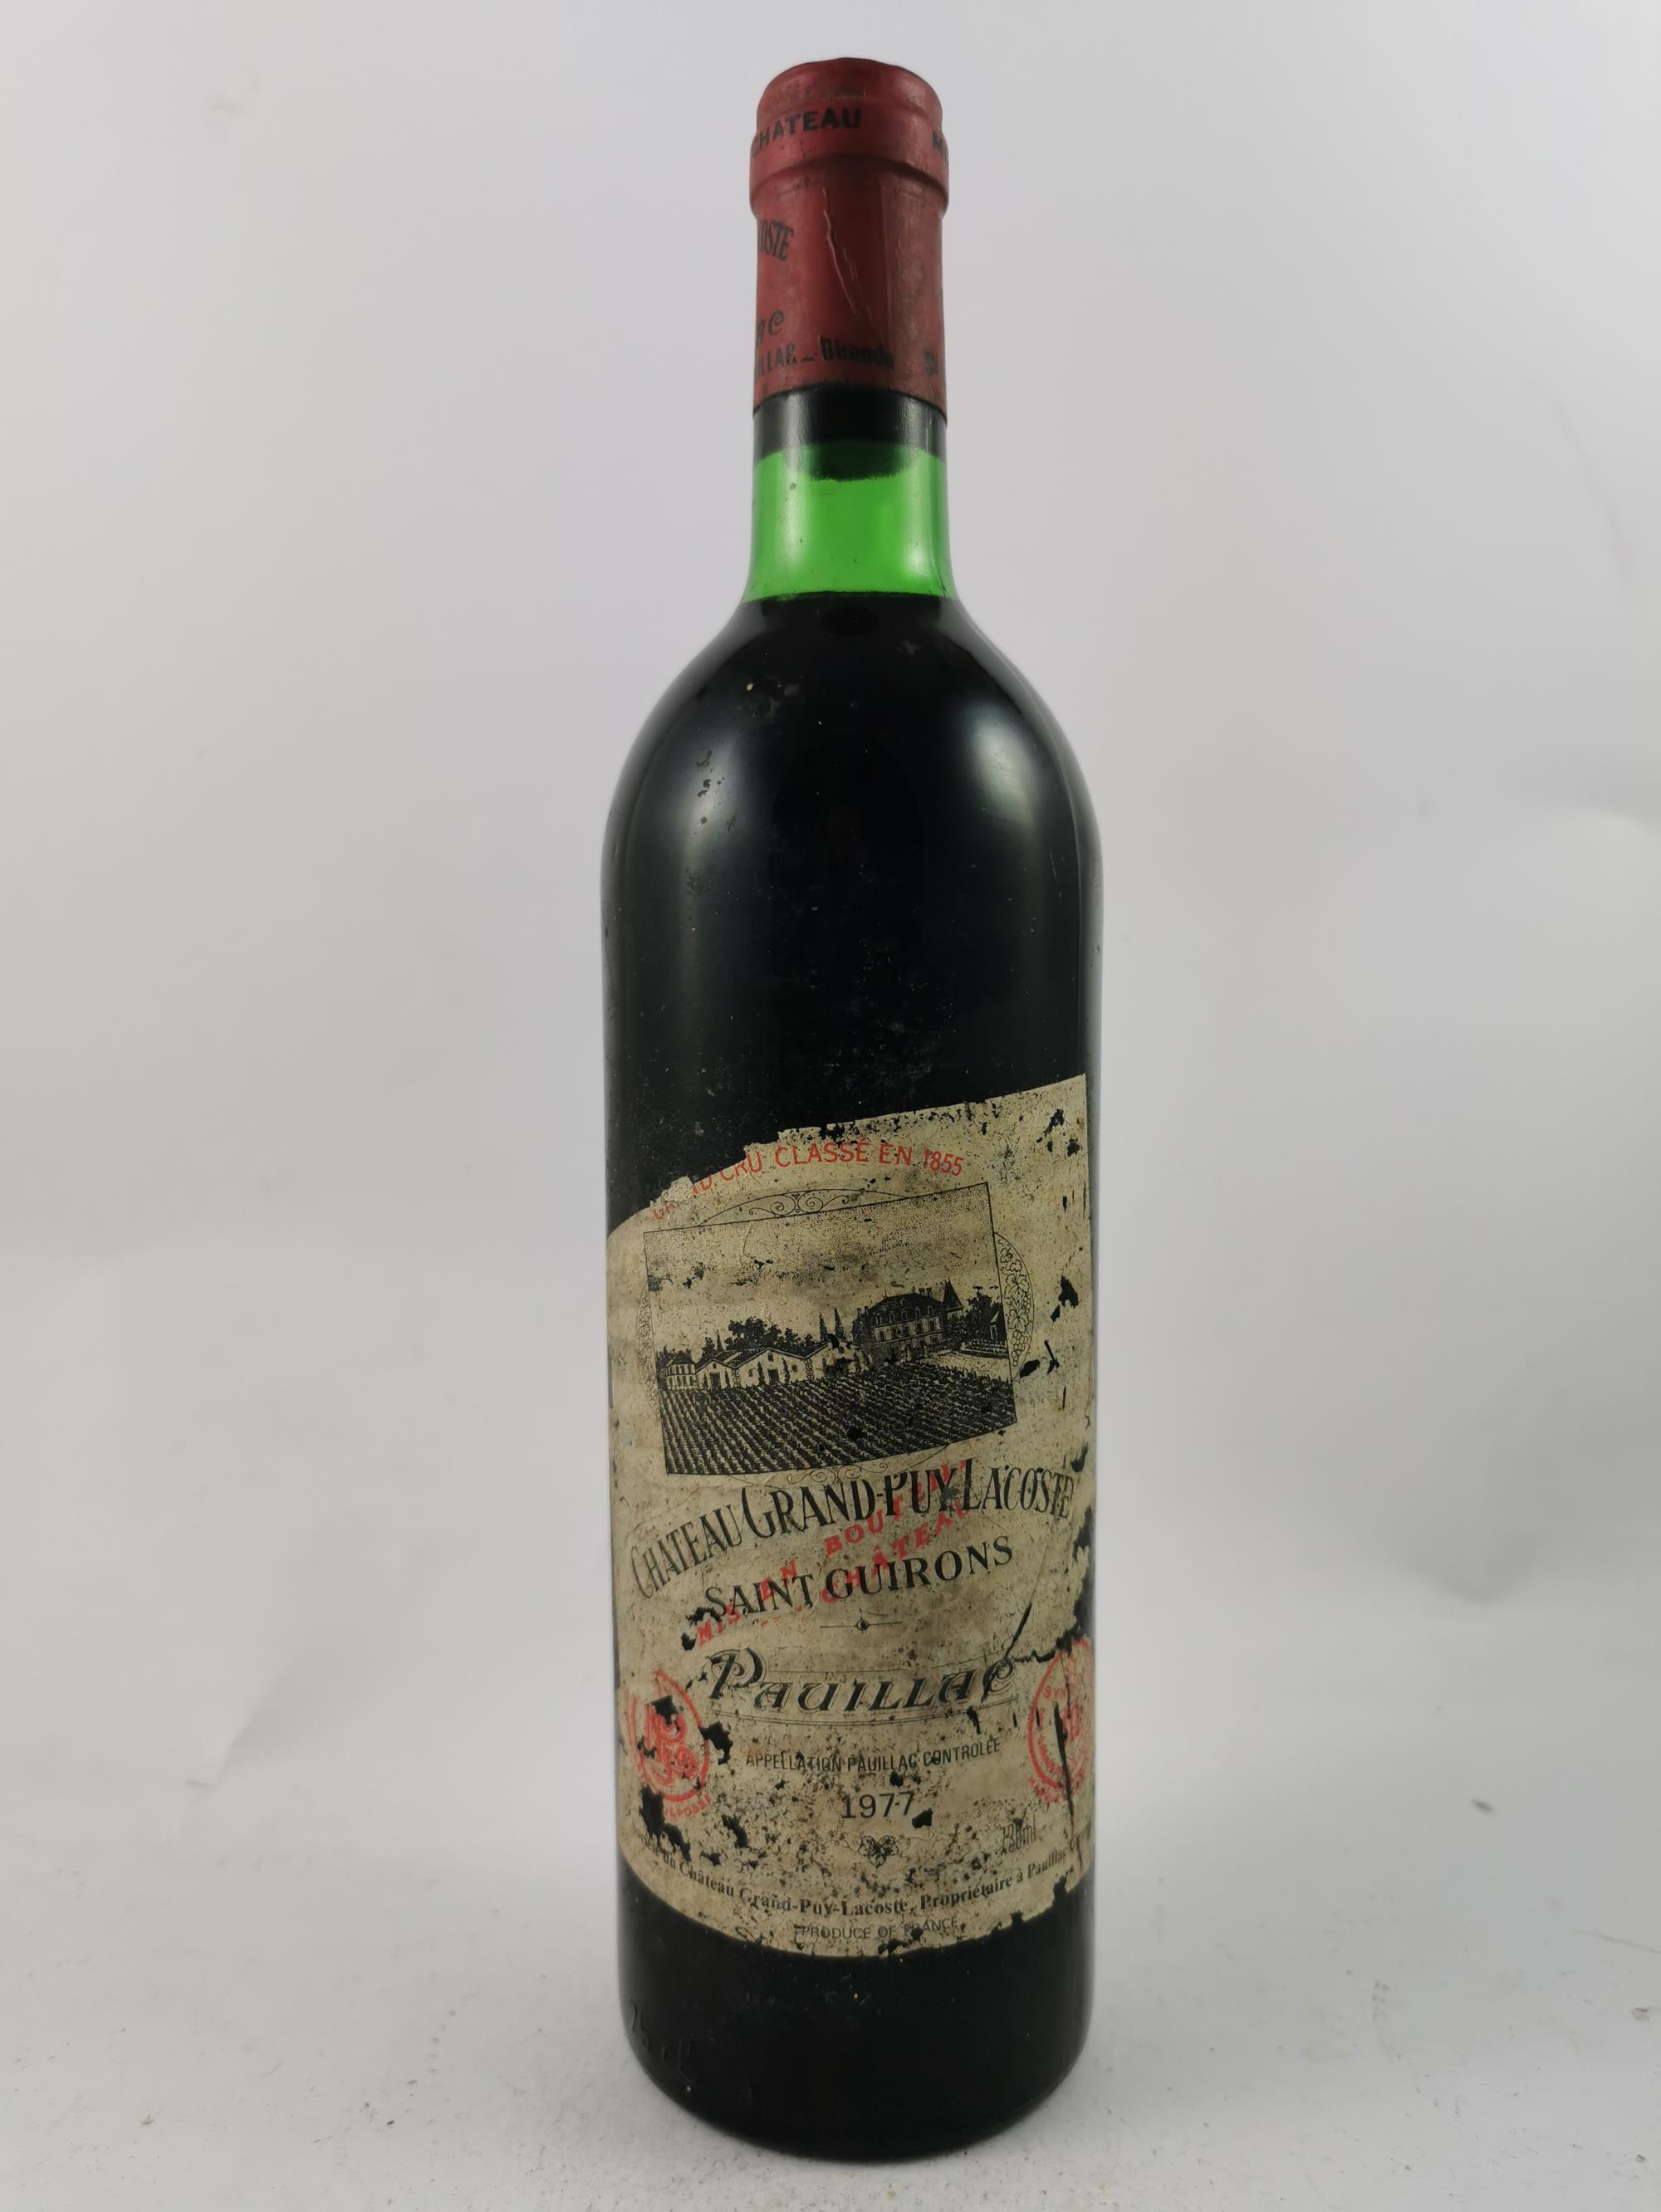 Grand-Puy-Lacoste 1977 Express Wine